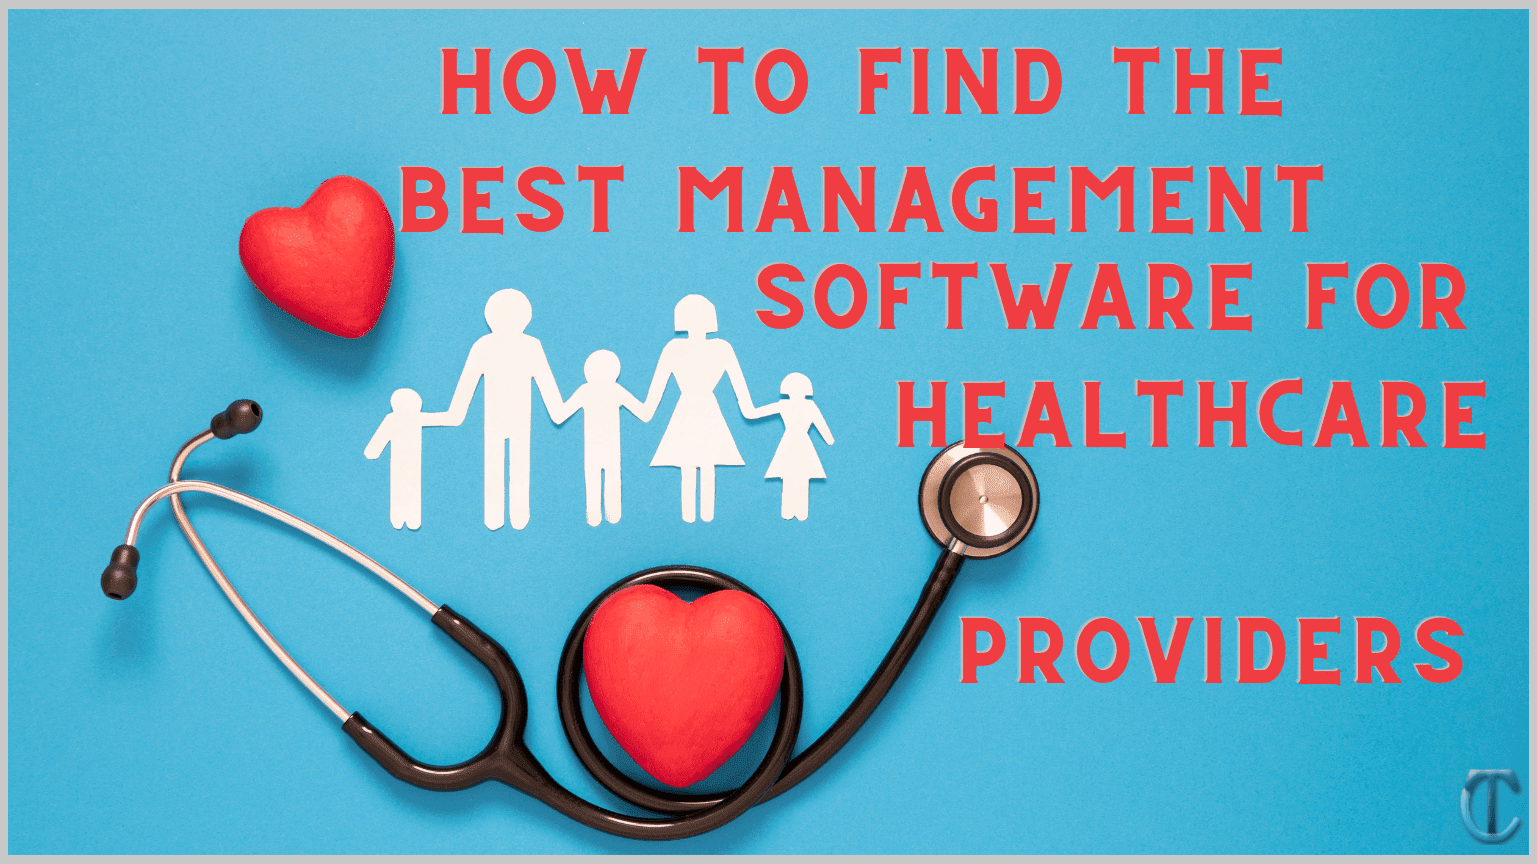 How to Find the Best Management Software for Healthcare Providers